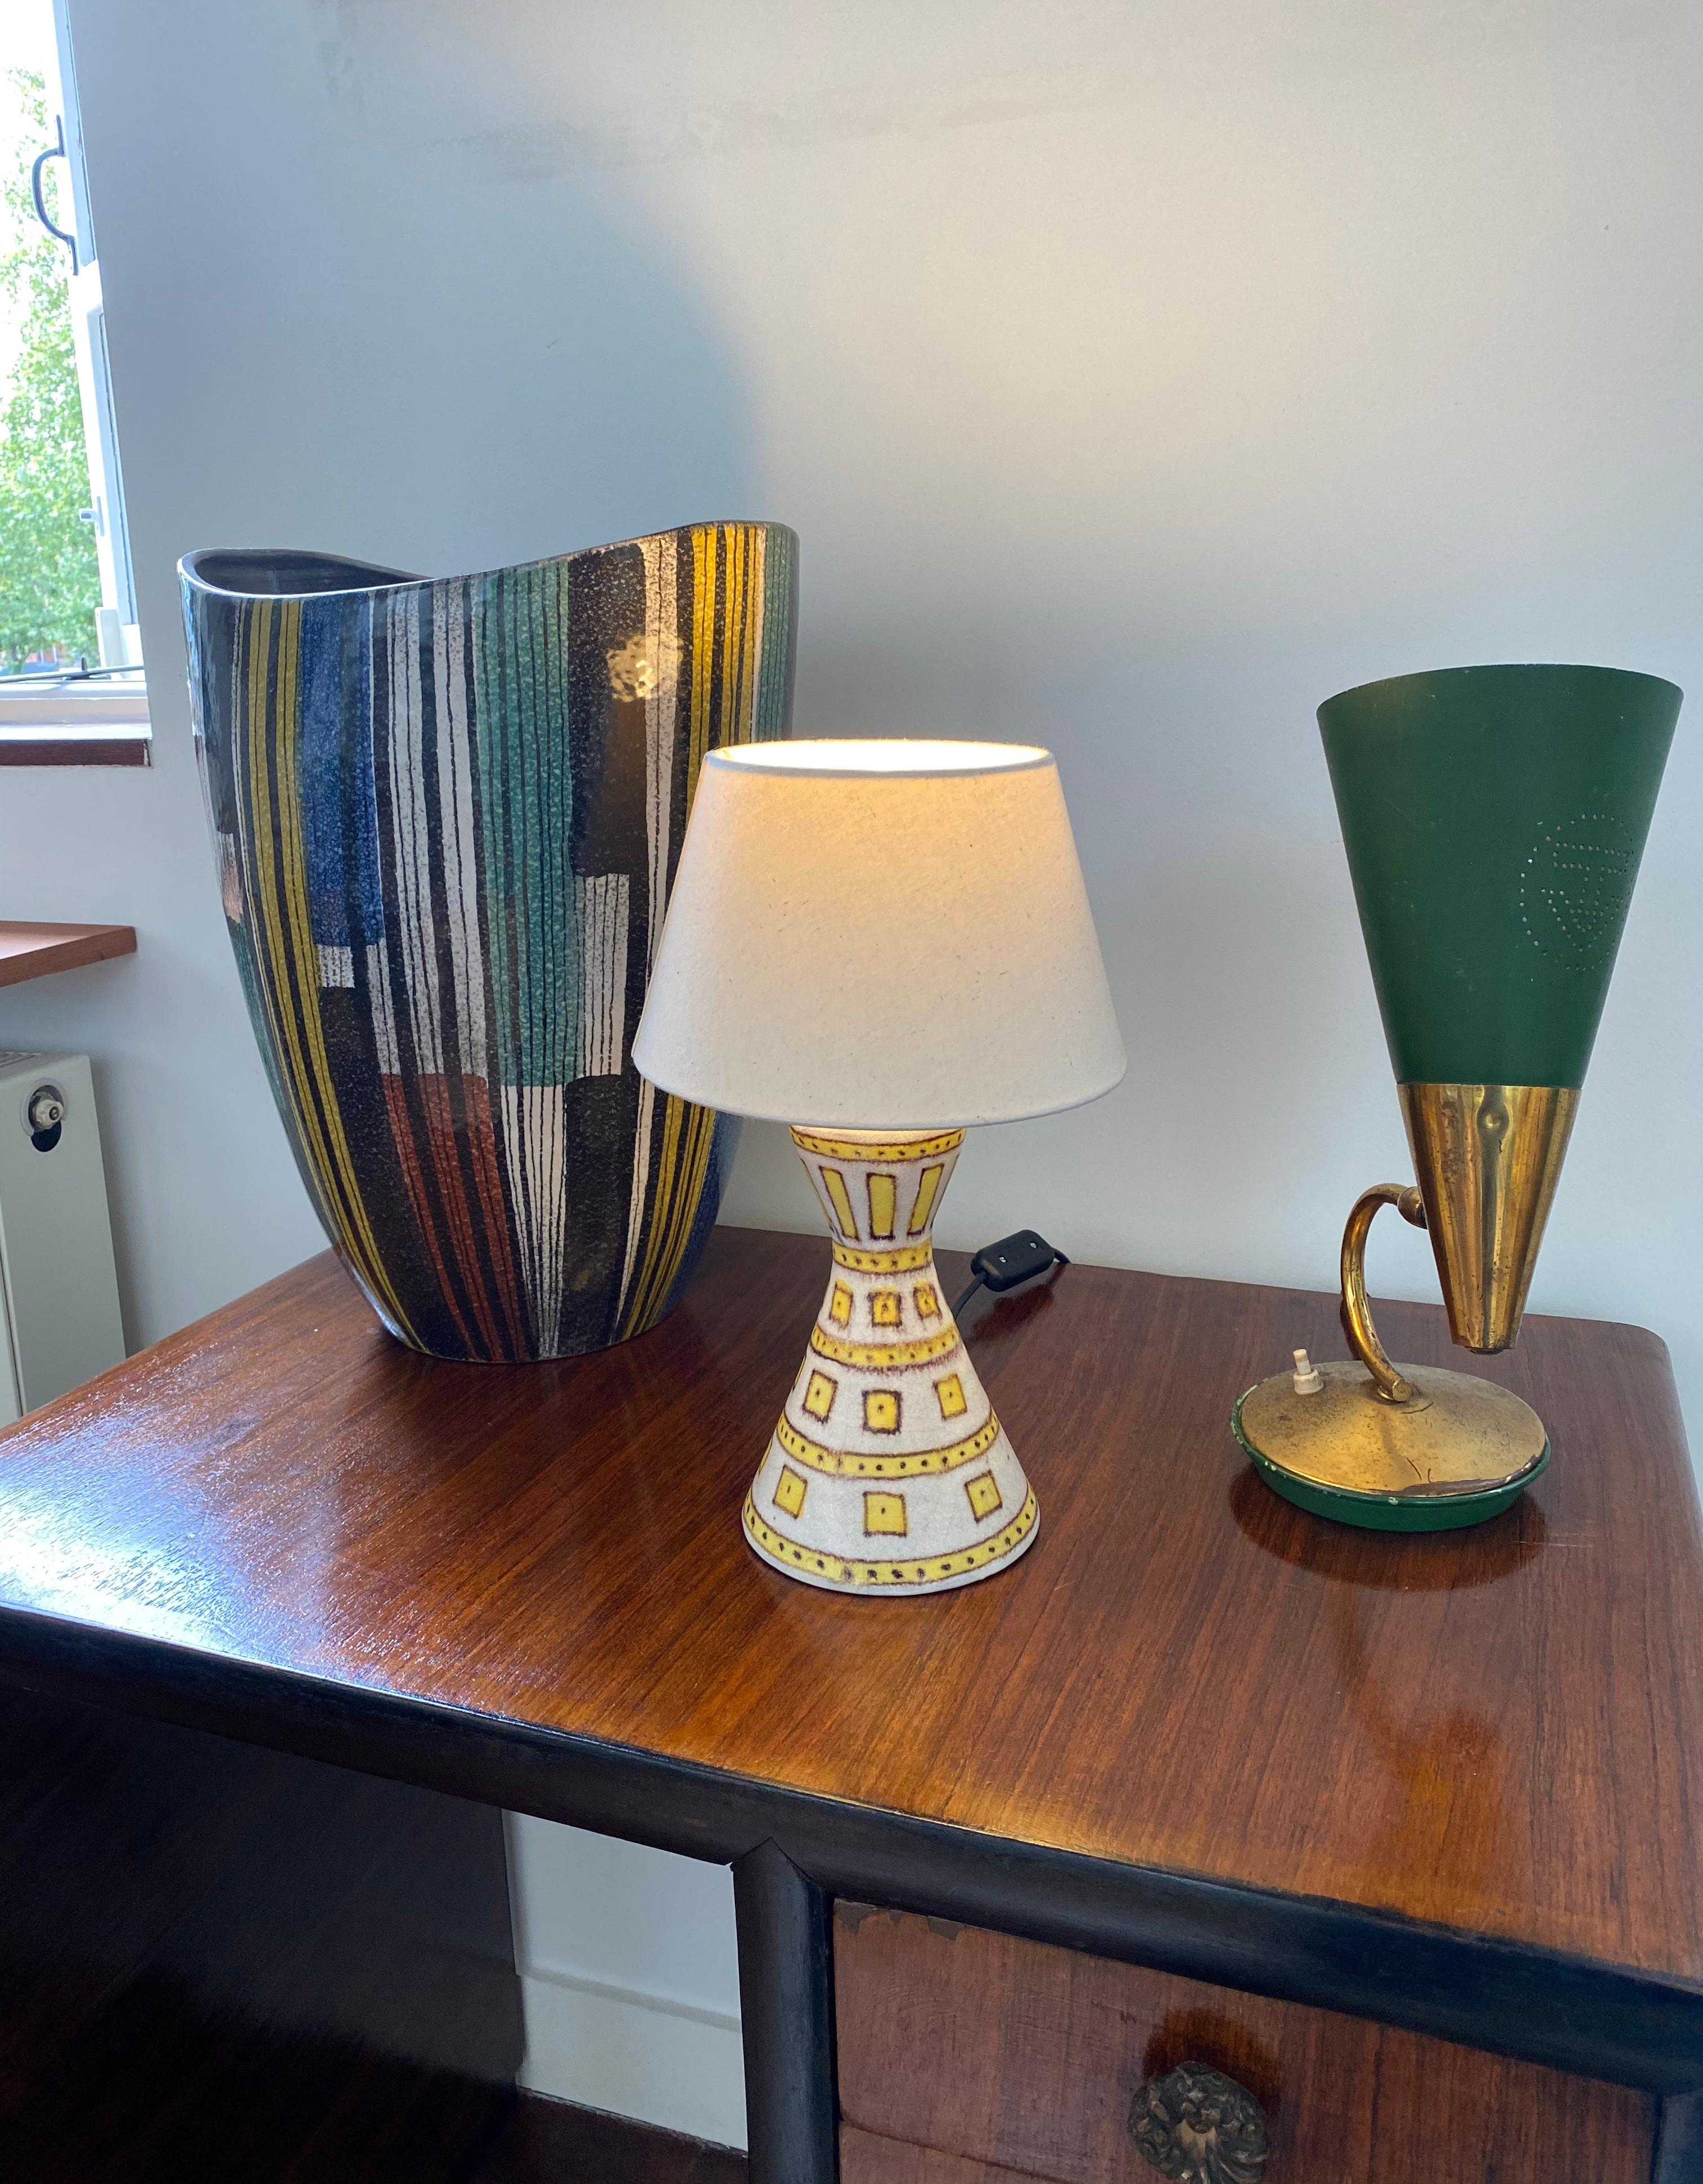 Decorative Italian ceramic table lamp by Guido Gambone, (circa 1950s). The piece is hand painted in soft yellow with a geometric shapes motif on a pearly-white base. In fair vintage condition. Some evident restoration work has been carried out on